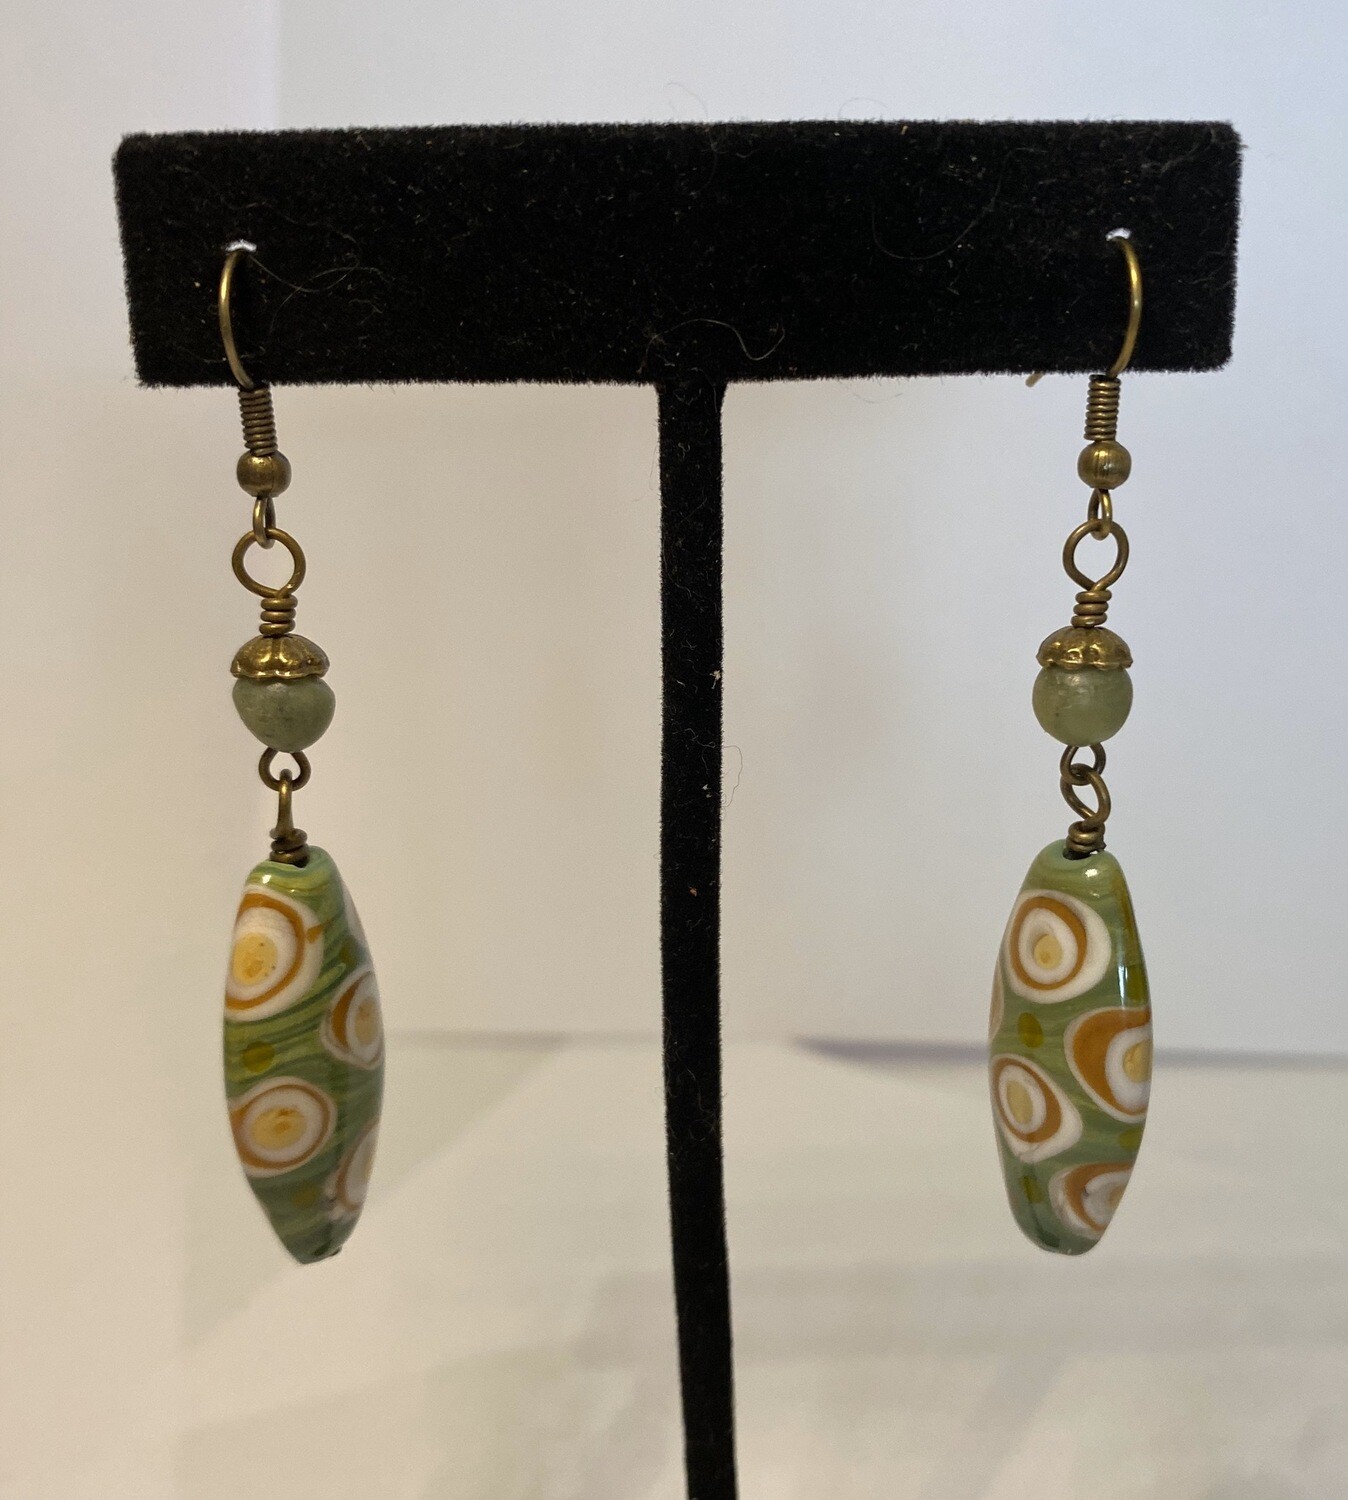 DK Earrings Stone Lime Tan Circles Hand Made Locally